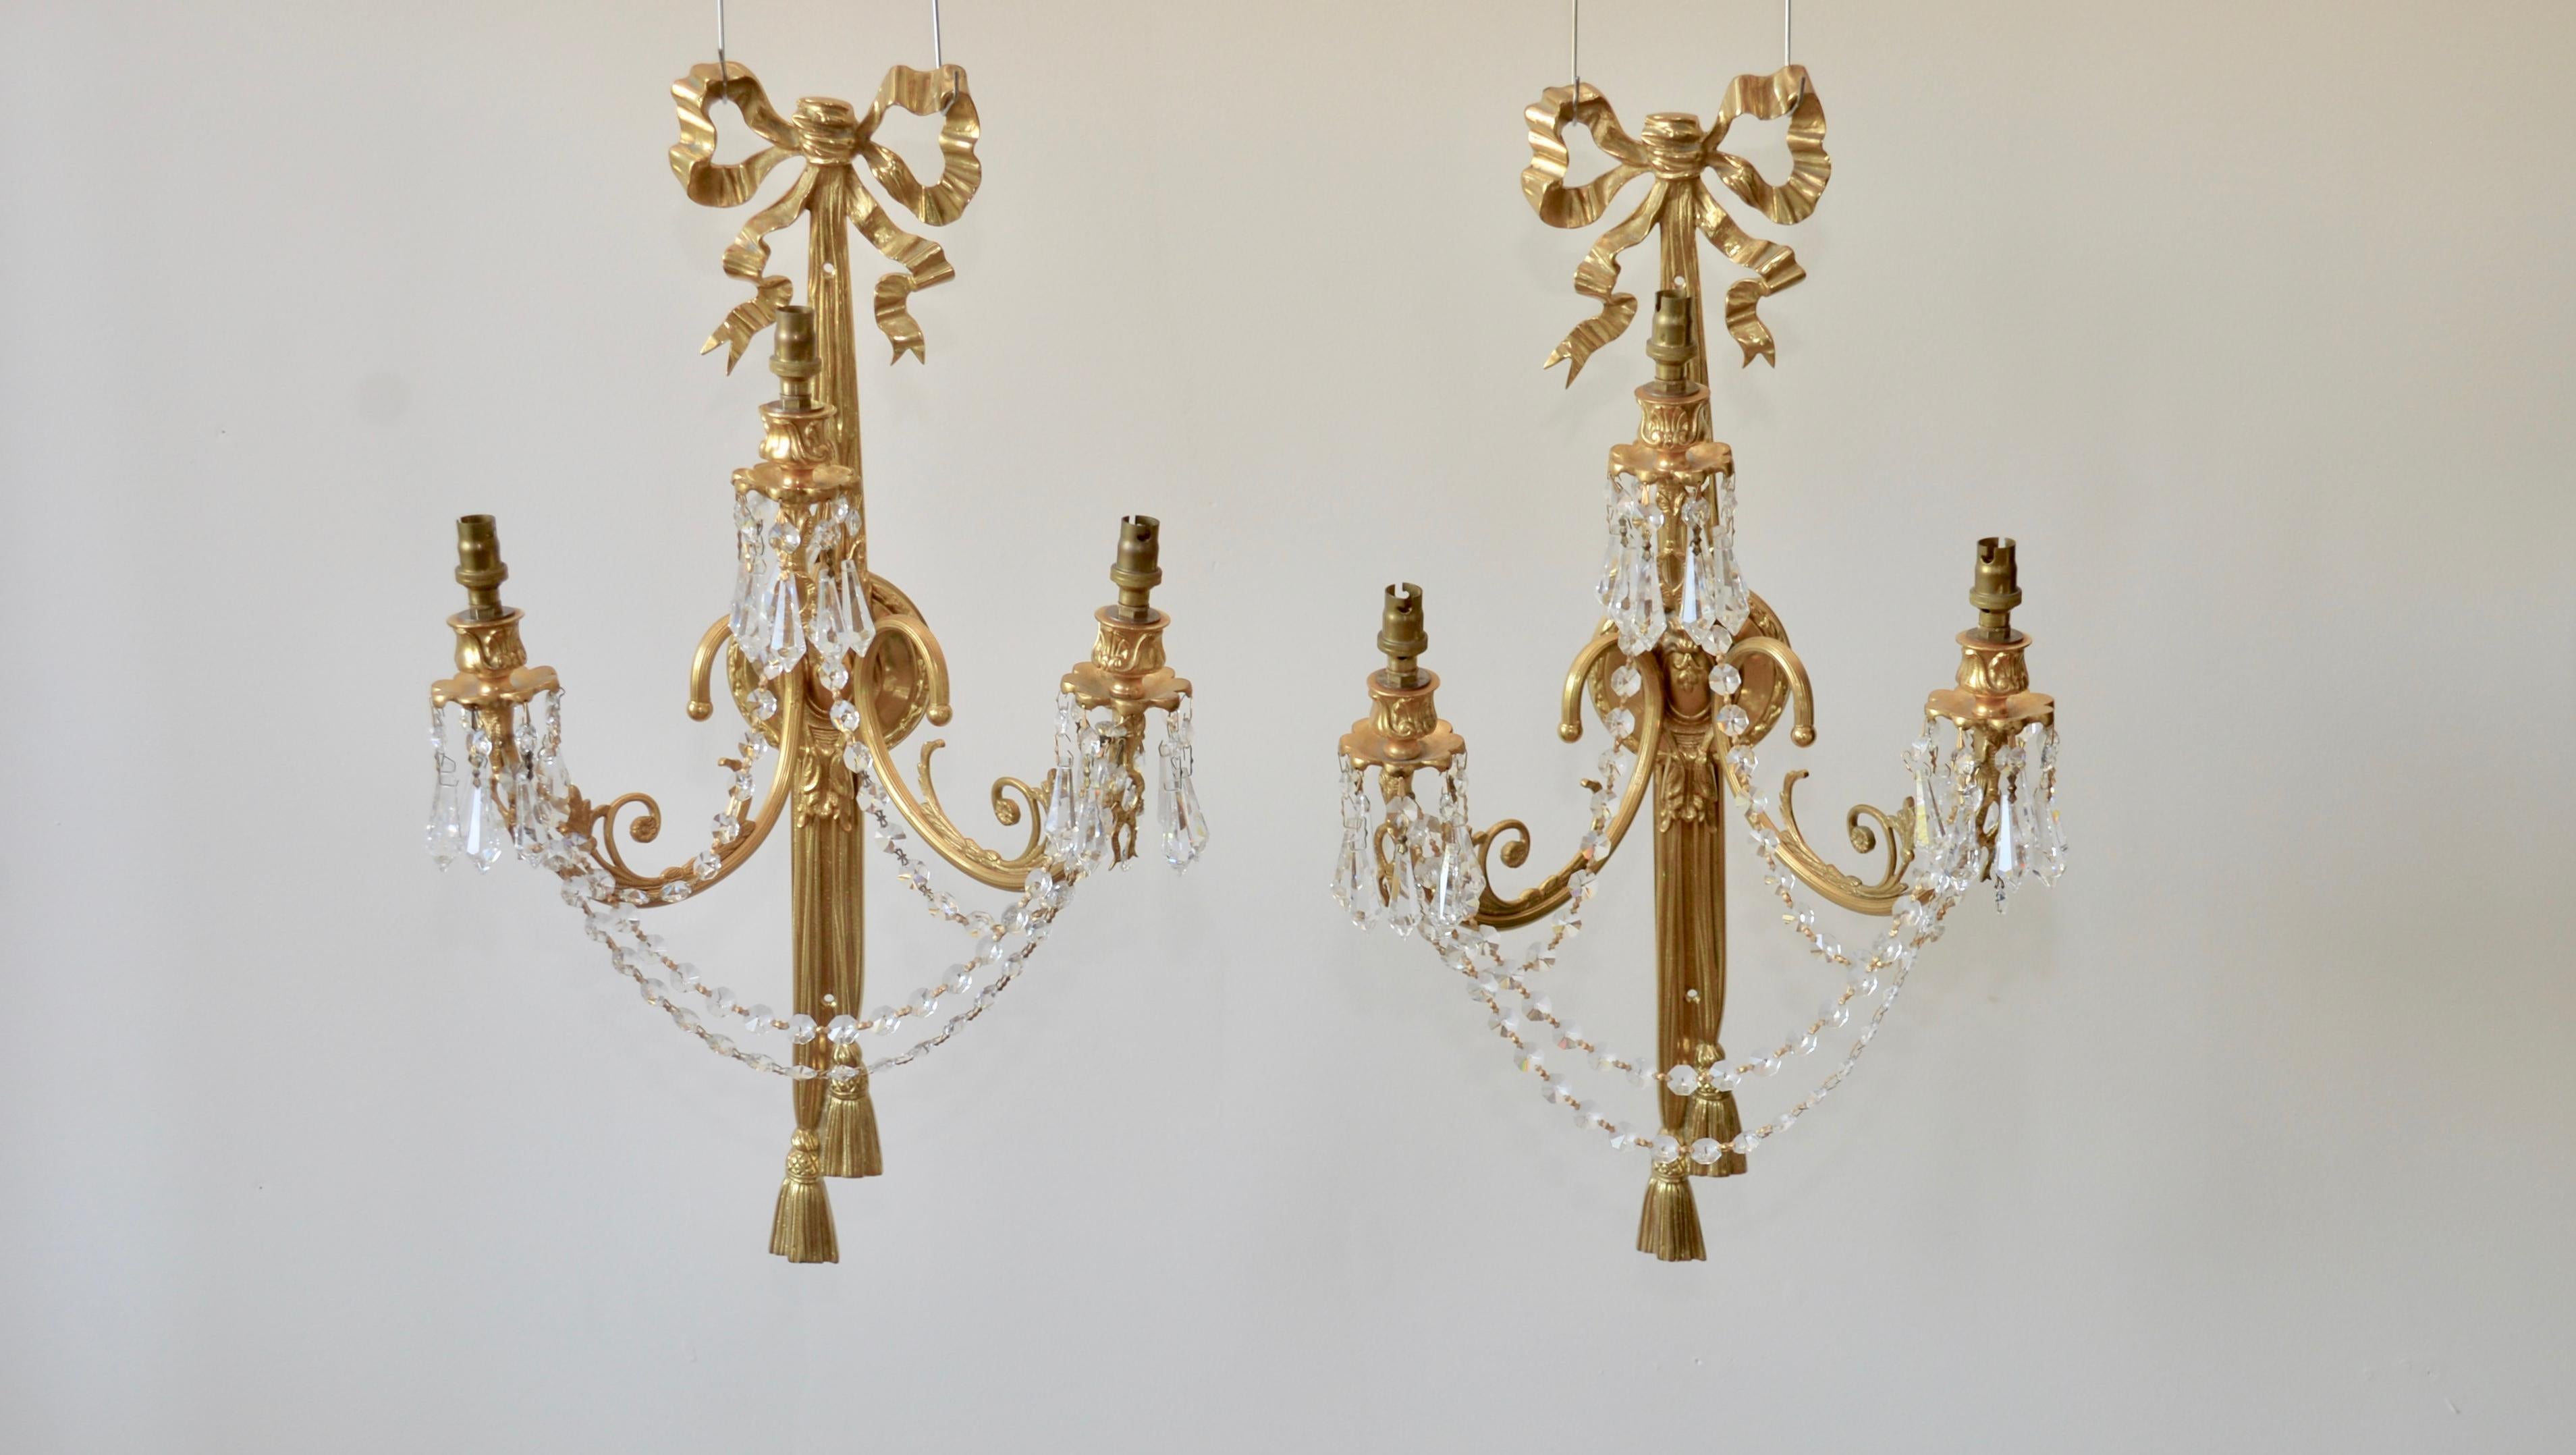 A highly decorative and impressive pair of wall lights, superb quality gold gilded brass with cut glass droplets. Three curved branches with lovely detail two opposing and one central branch set on a highly decorative large ribbon mount trailing